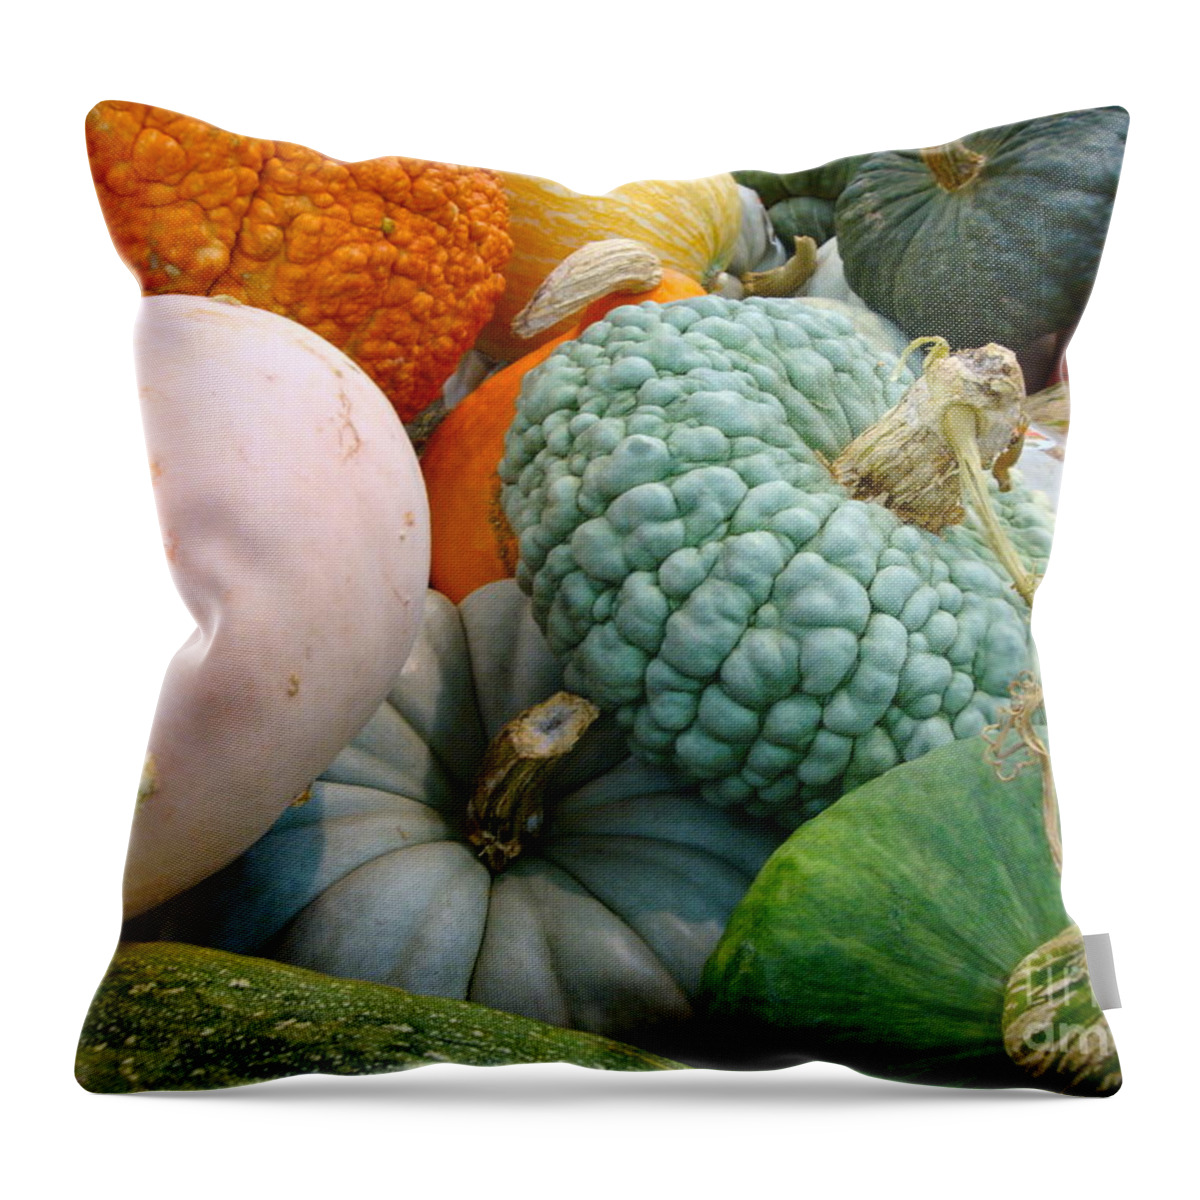 Cathy Dee Janes Throw Pillow featuring the photograph Abundant Harvest by Cathy Dee Janes